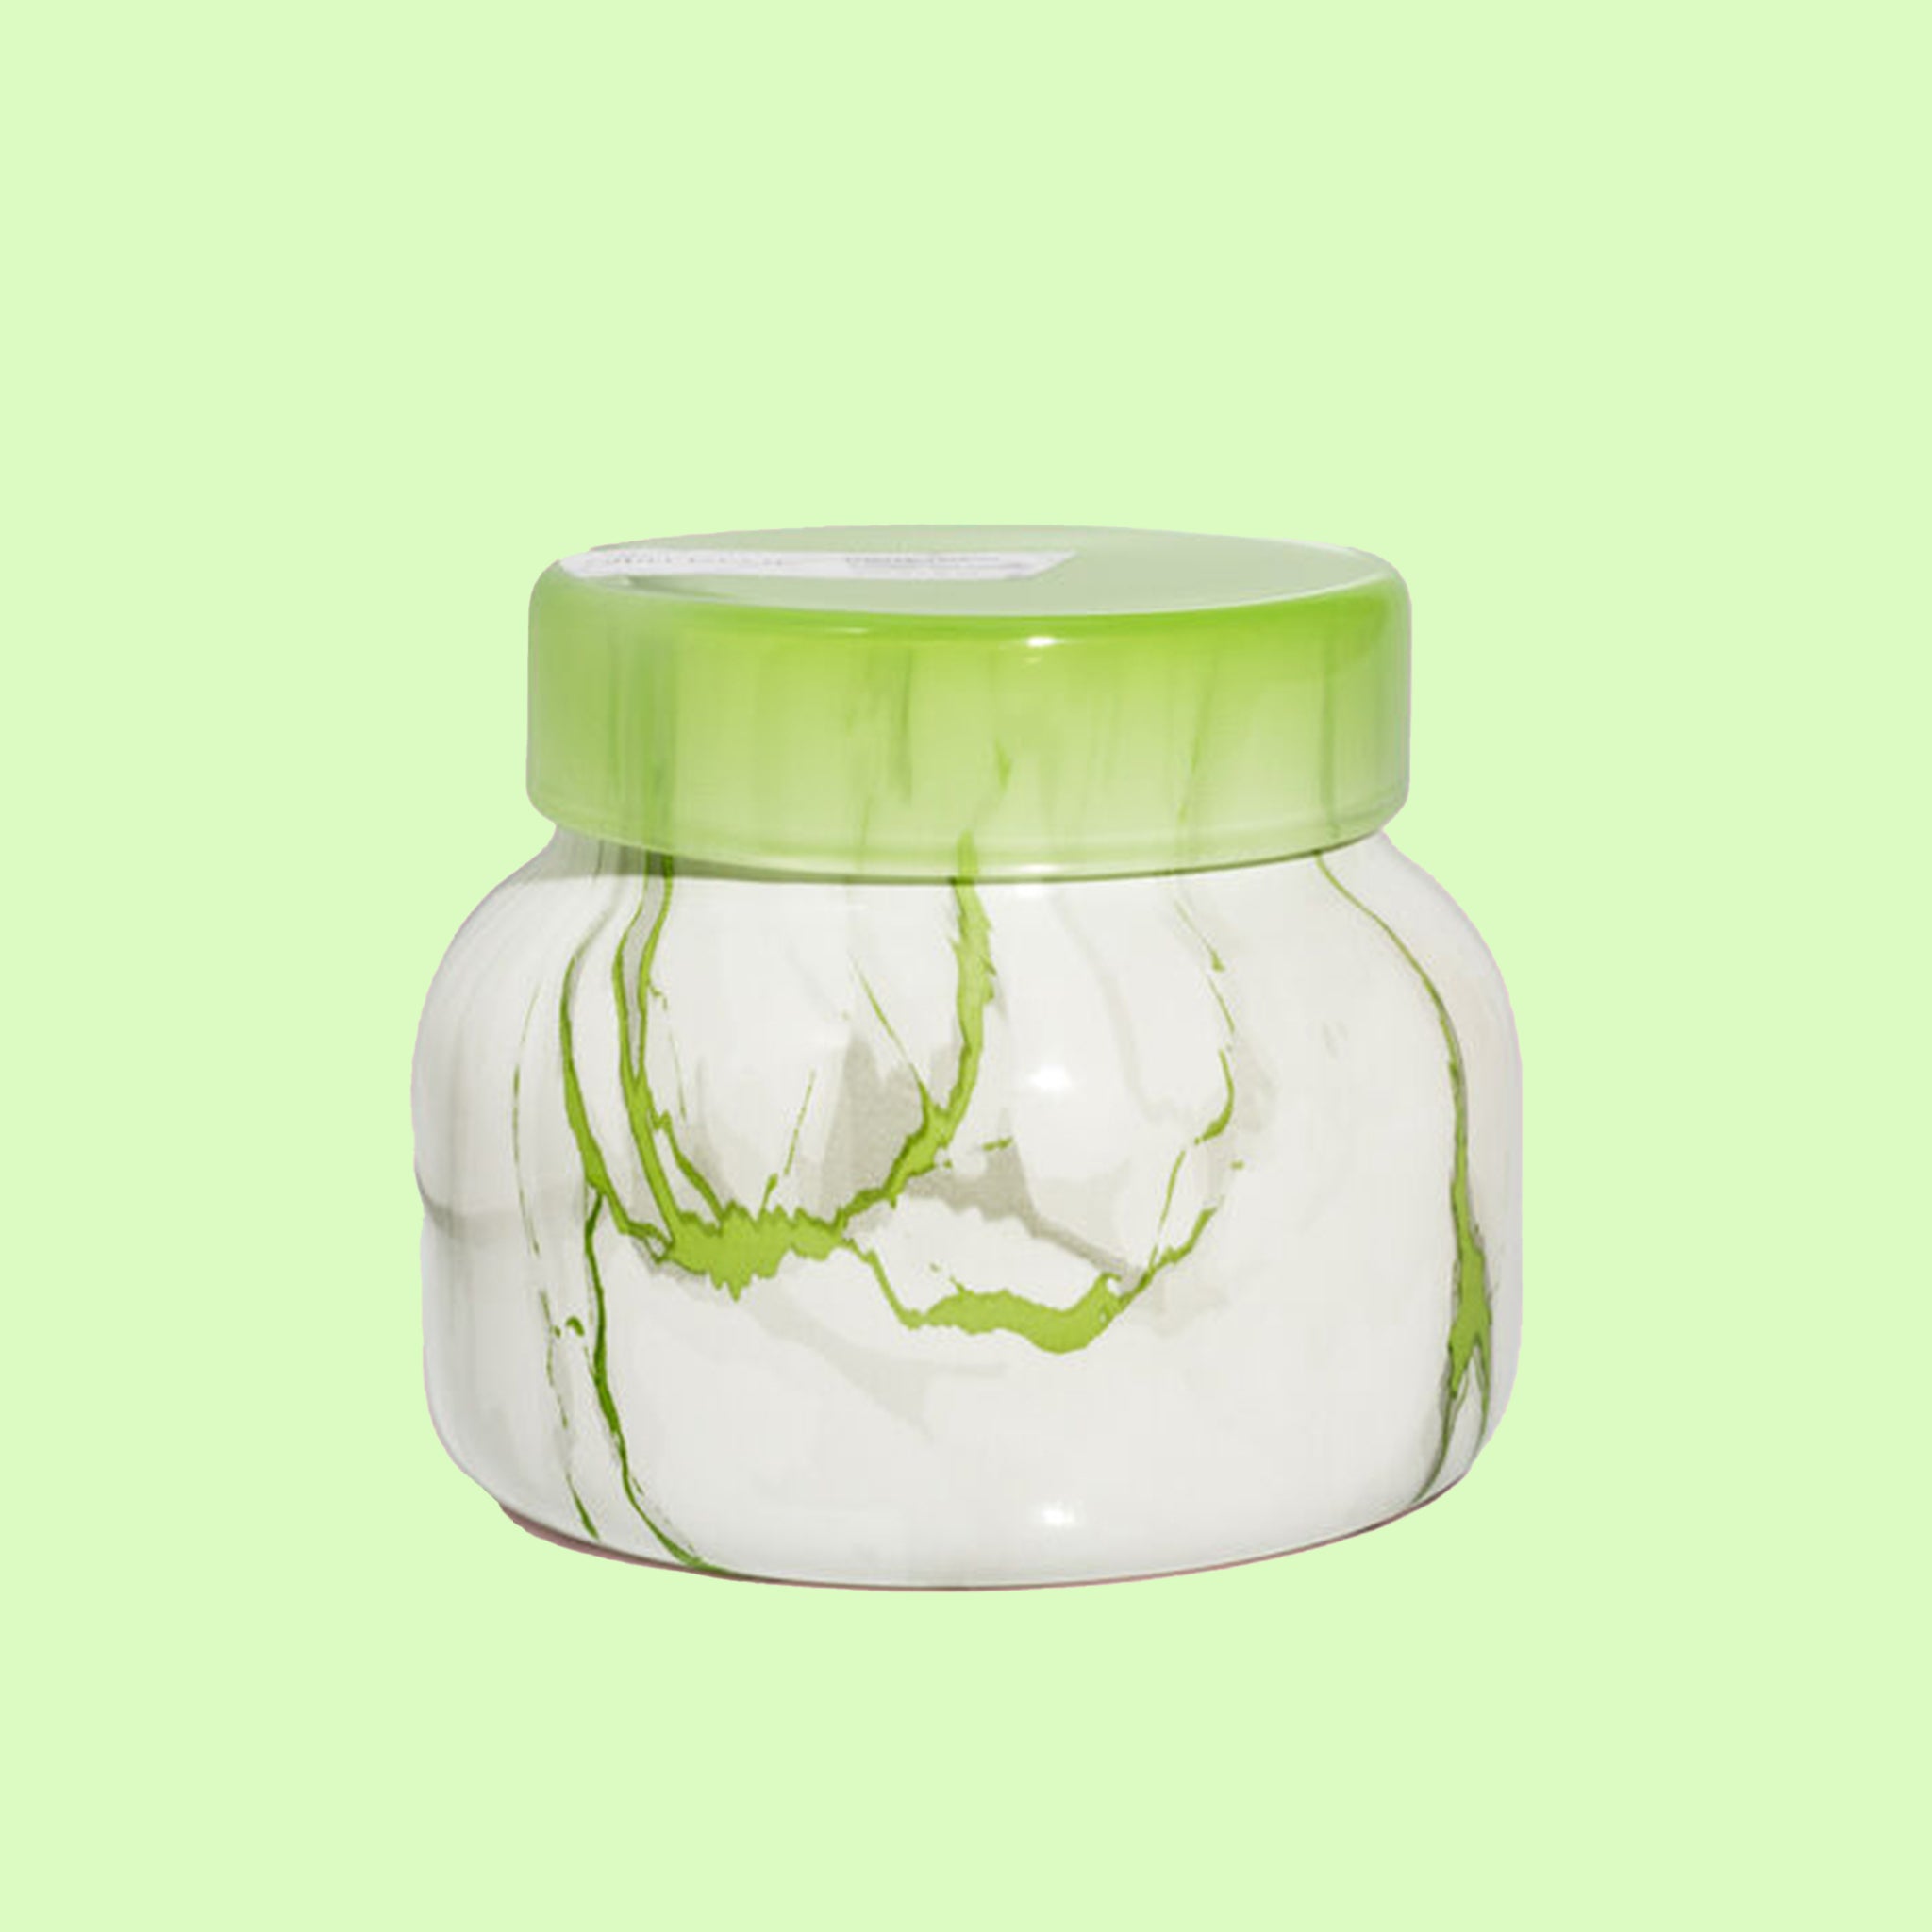 On a green background is a green and white marble jar candle with a lid.